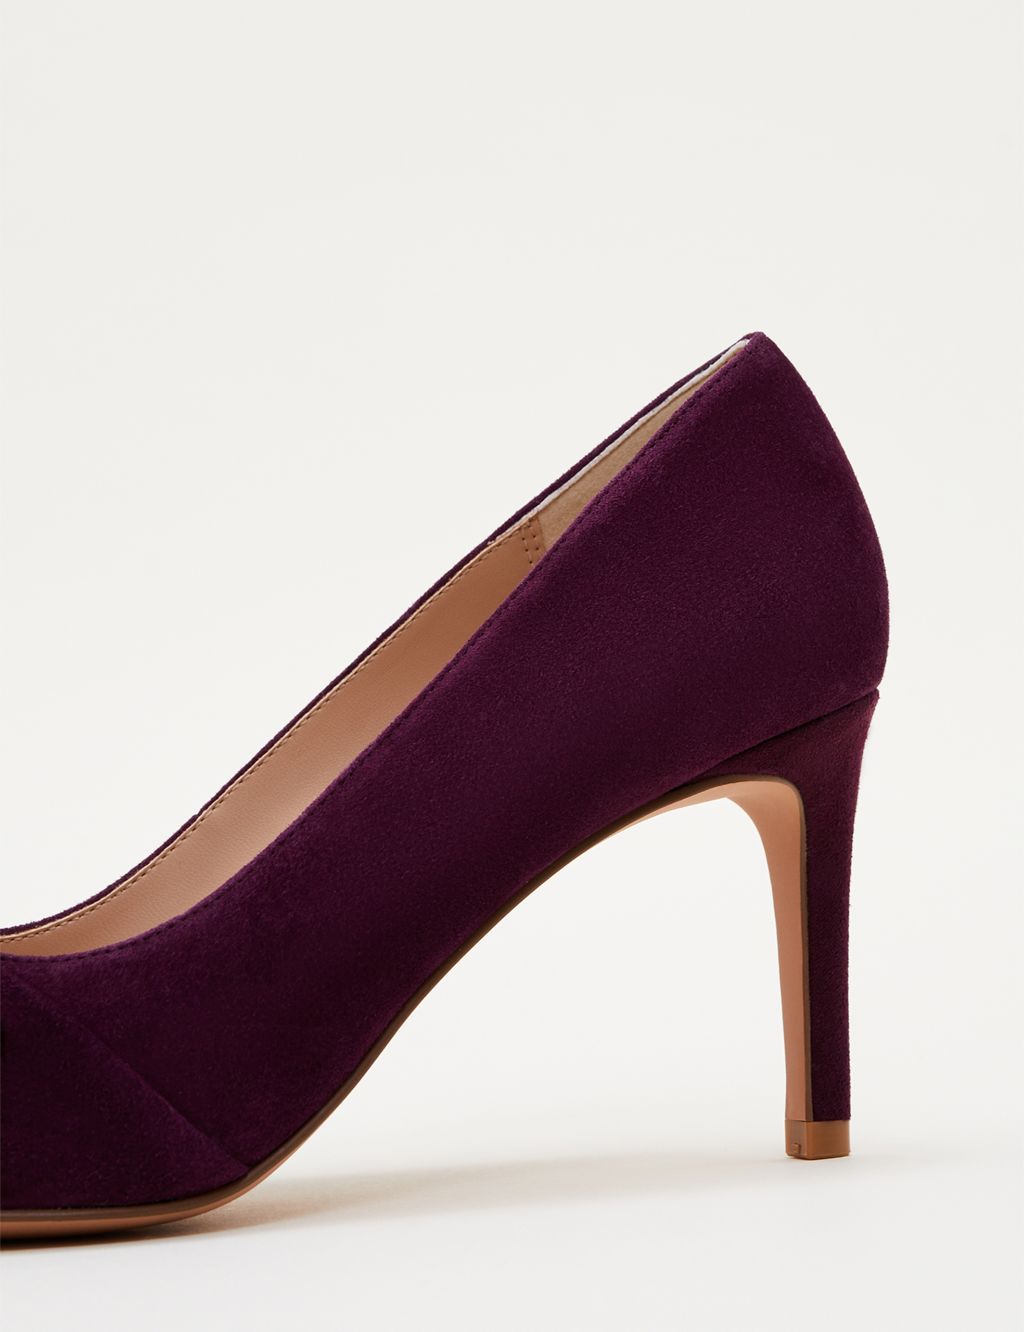 Suede Stiletto Heel Pointed Court Shoes image 5